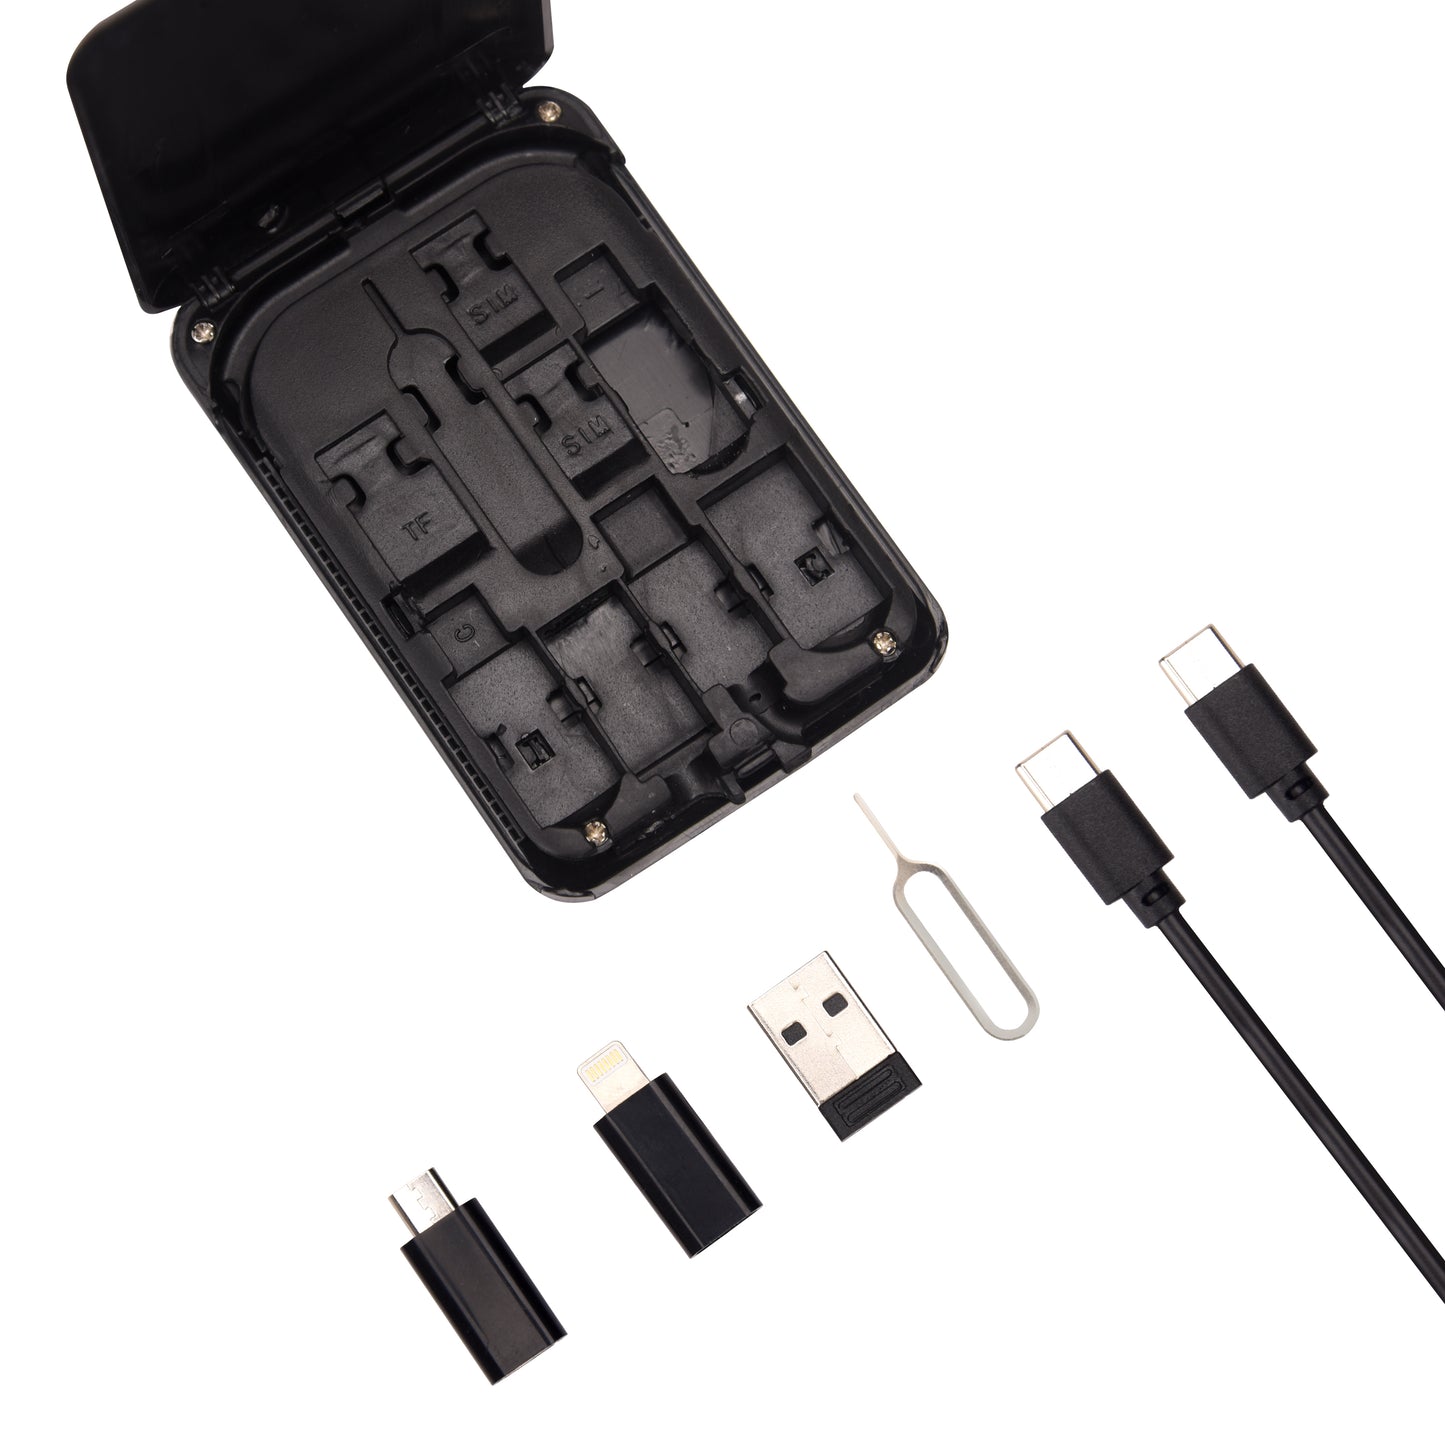 Mini Pocket Multifunctional Cable Kit - For Office Use, Personal Use, or Corporate Gifting